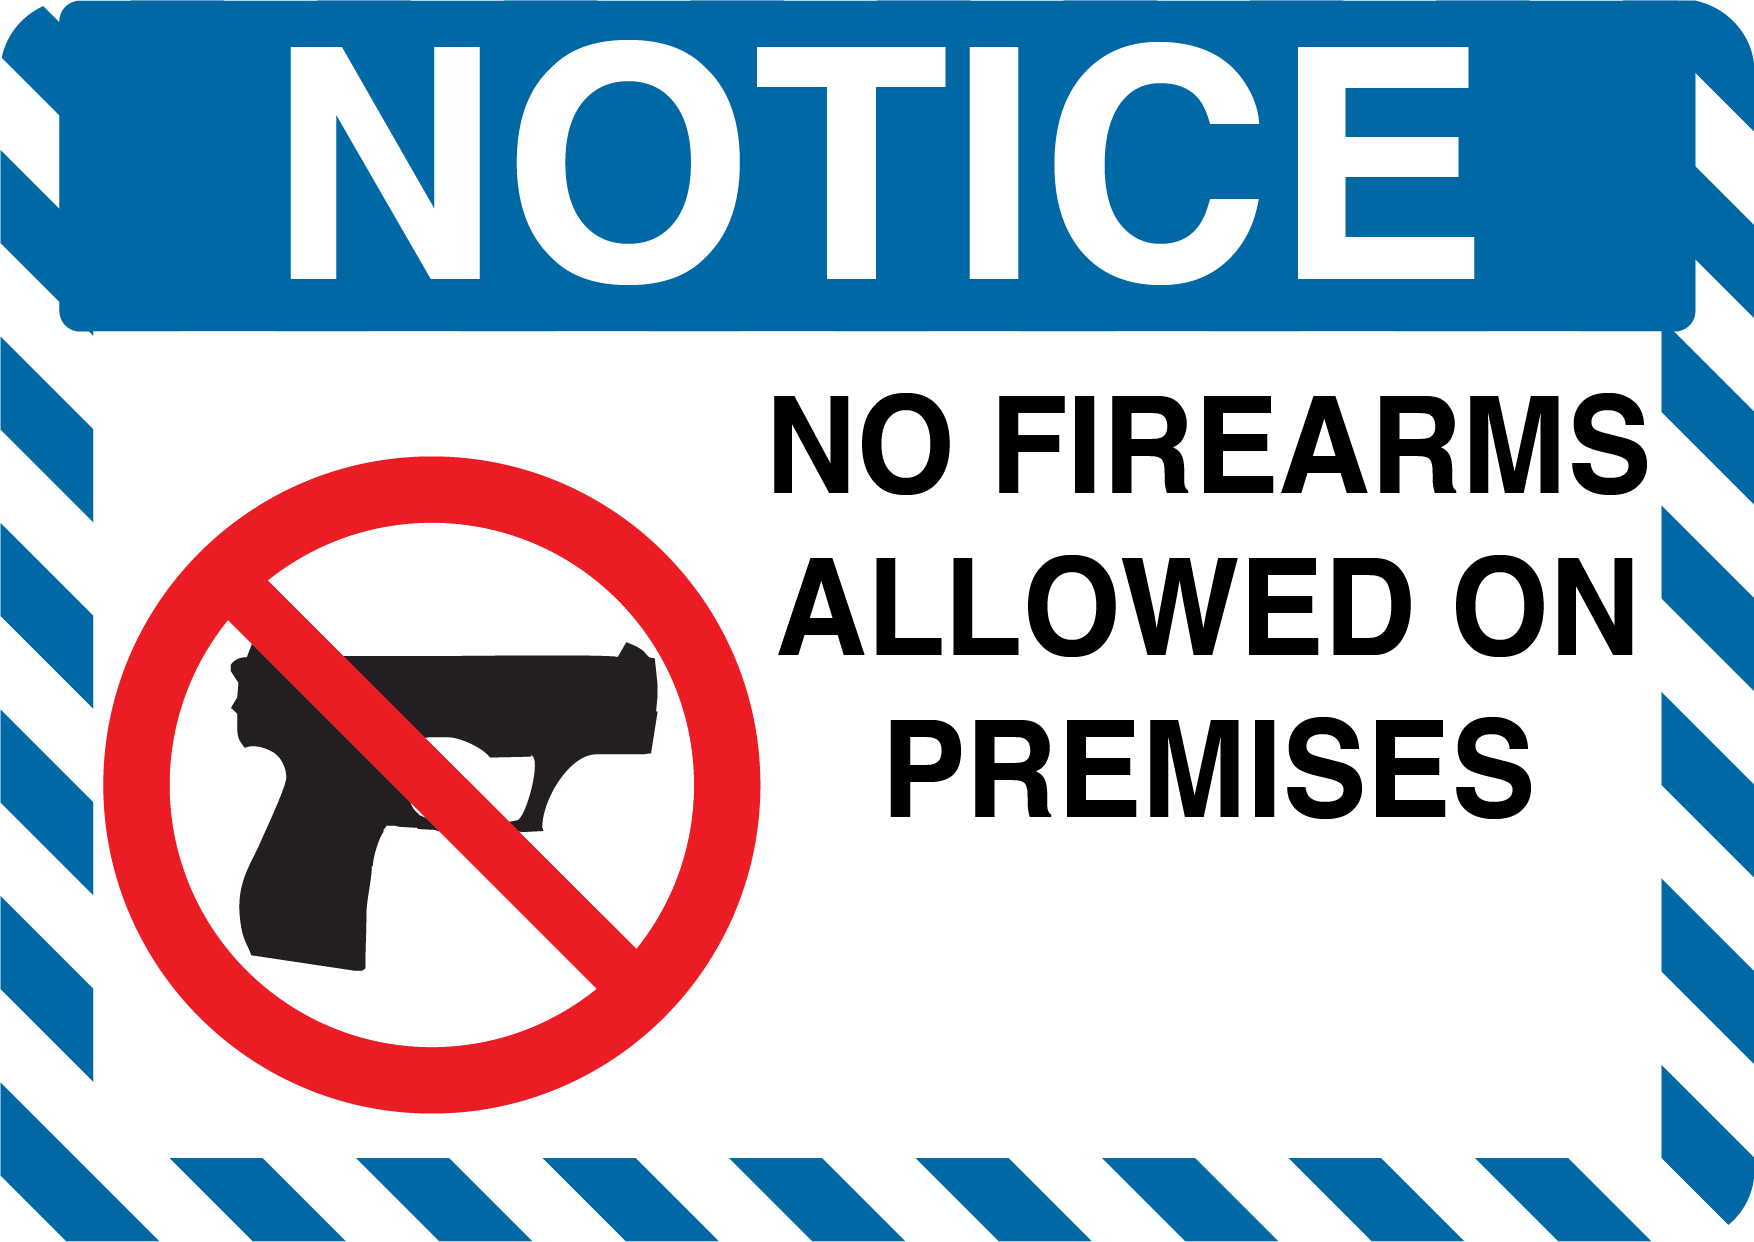 Notice "No Firearms Allowed On Premises" Durable Matte Laminated Vinyl Floor Sign- Various Sizes Available